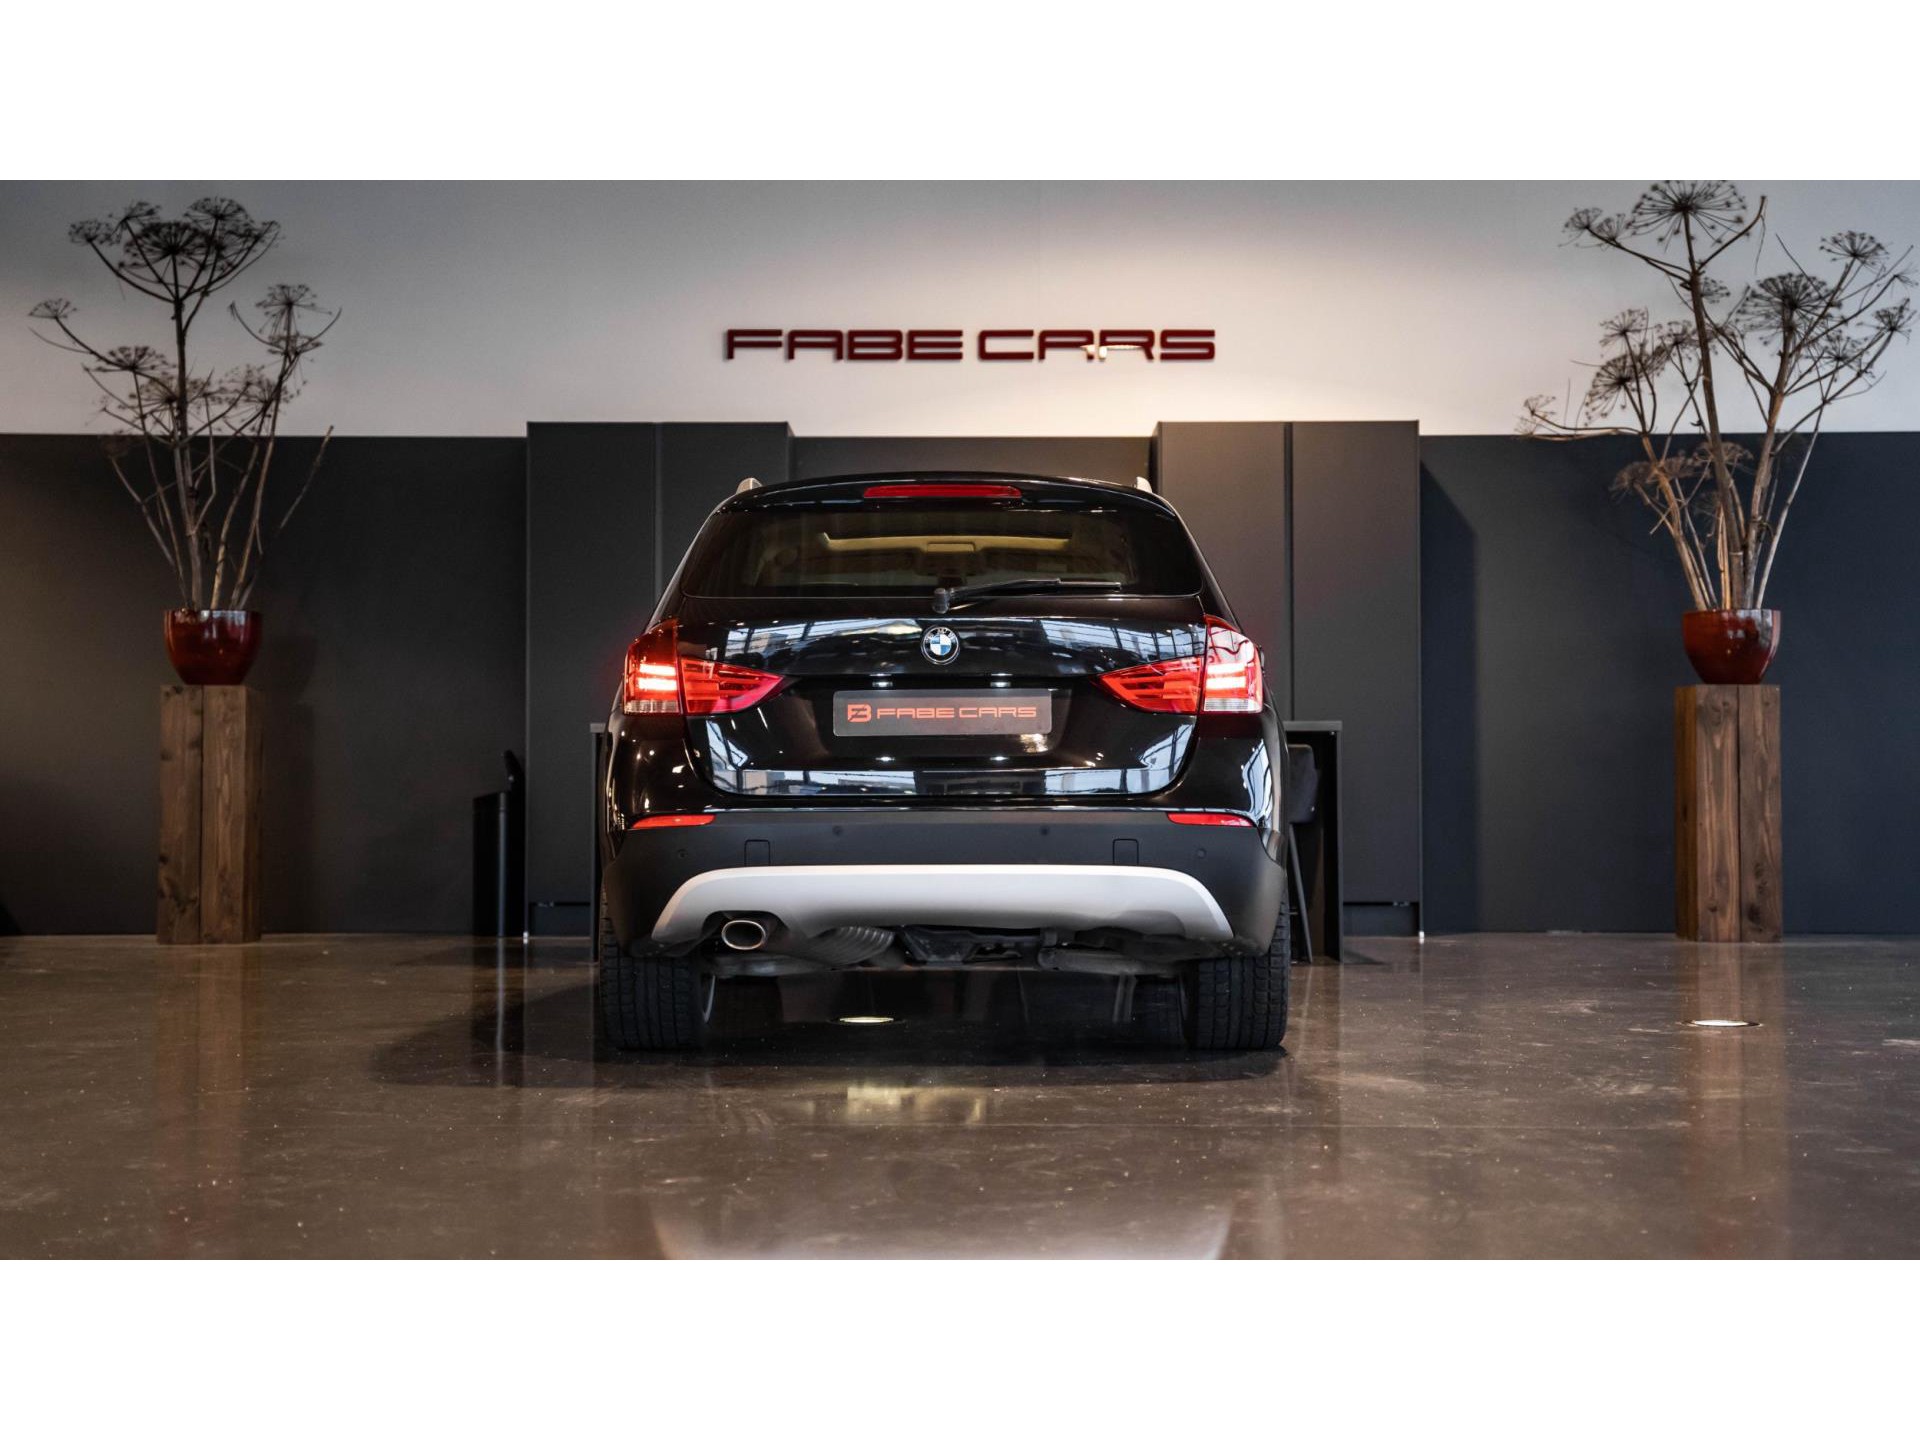 FABE Cars